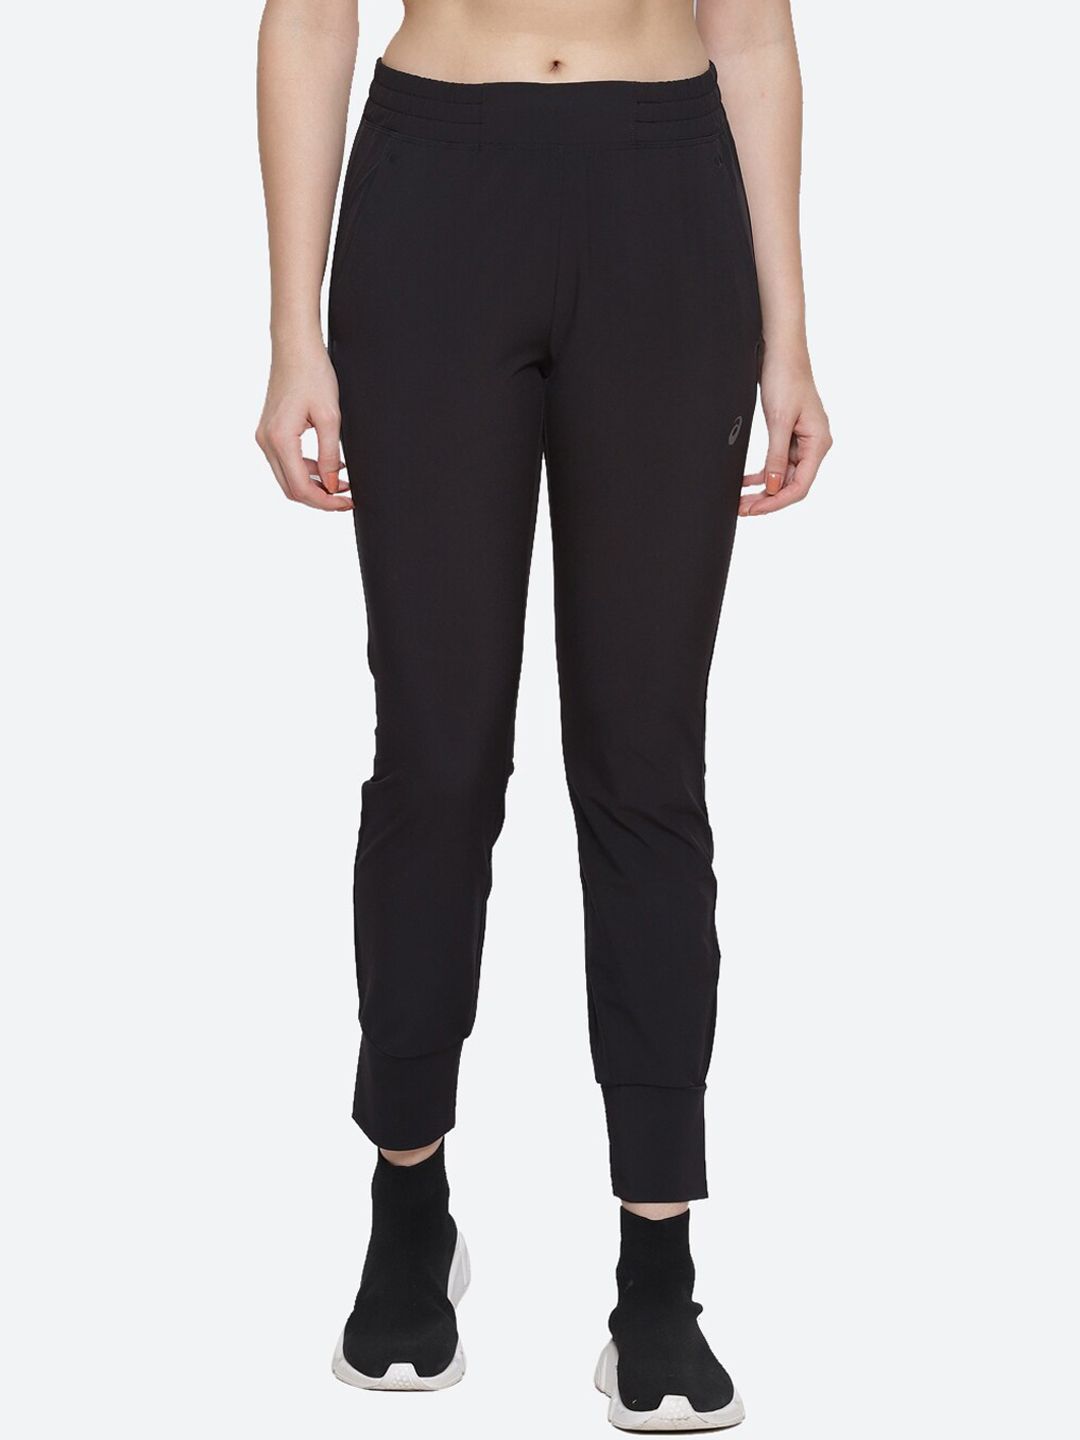 ASICS Women Black W Stretch Tapered Track Pants Price in India